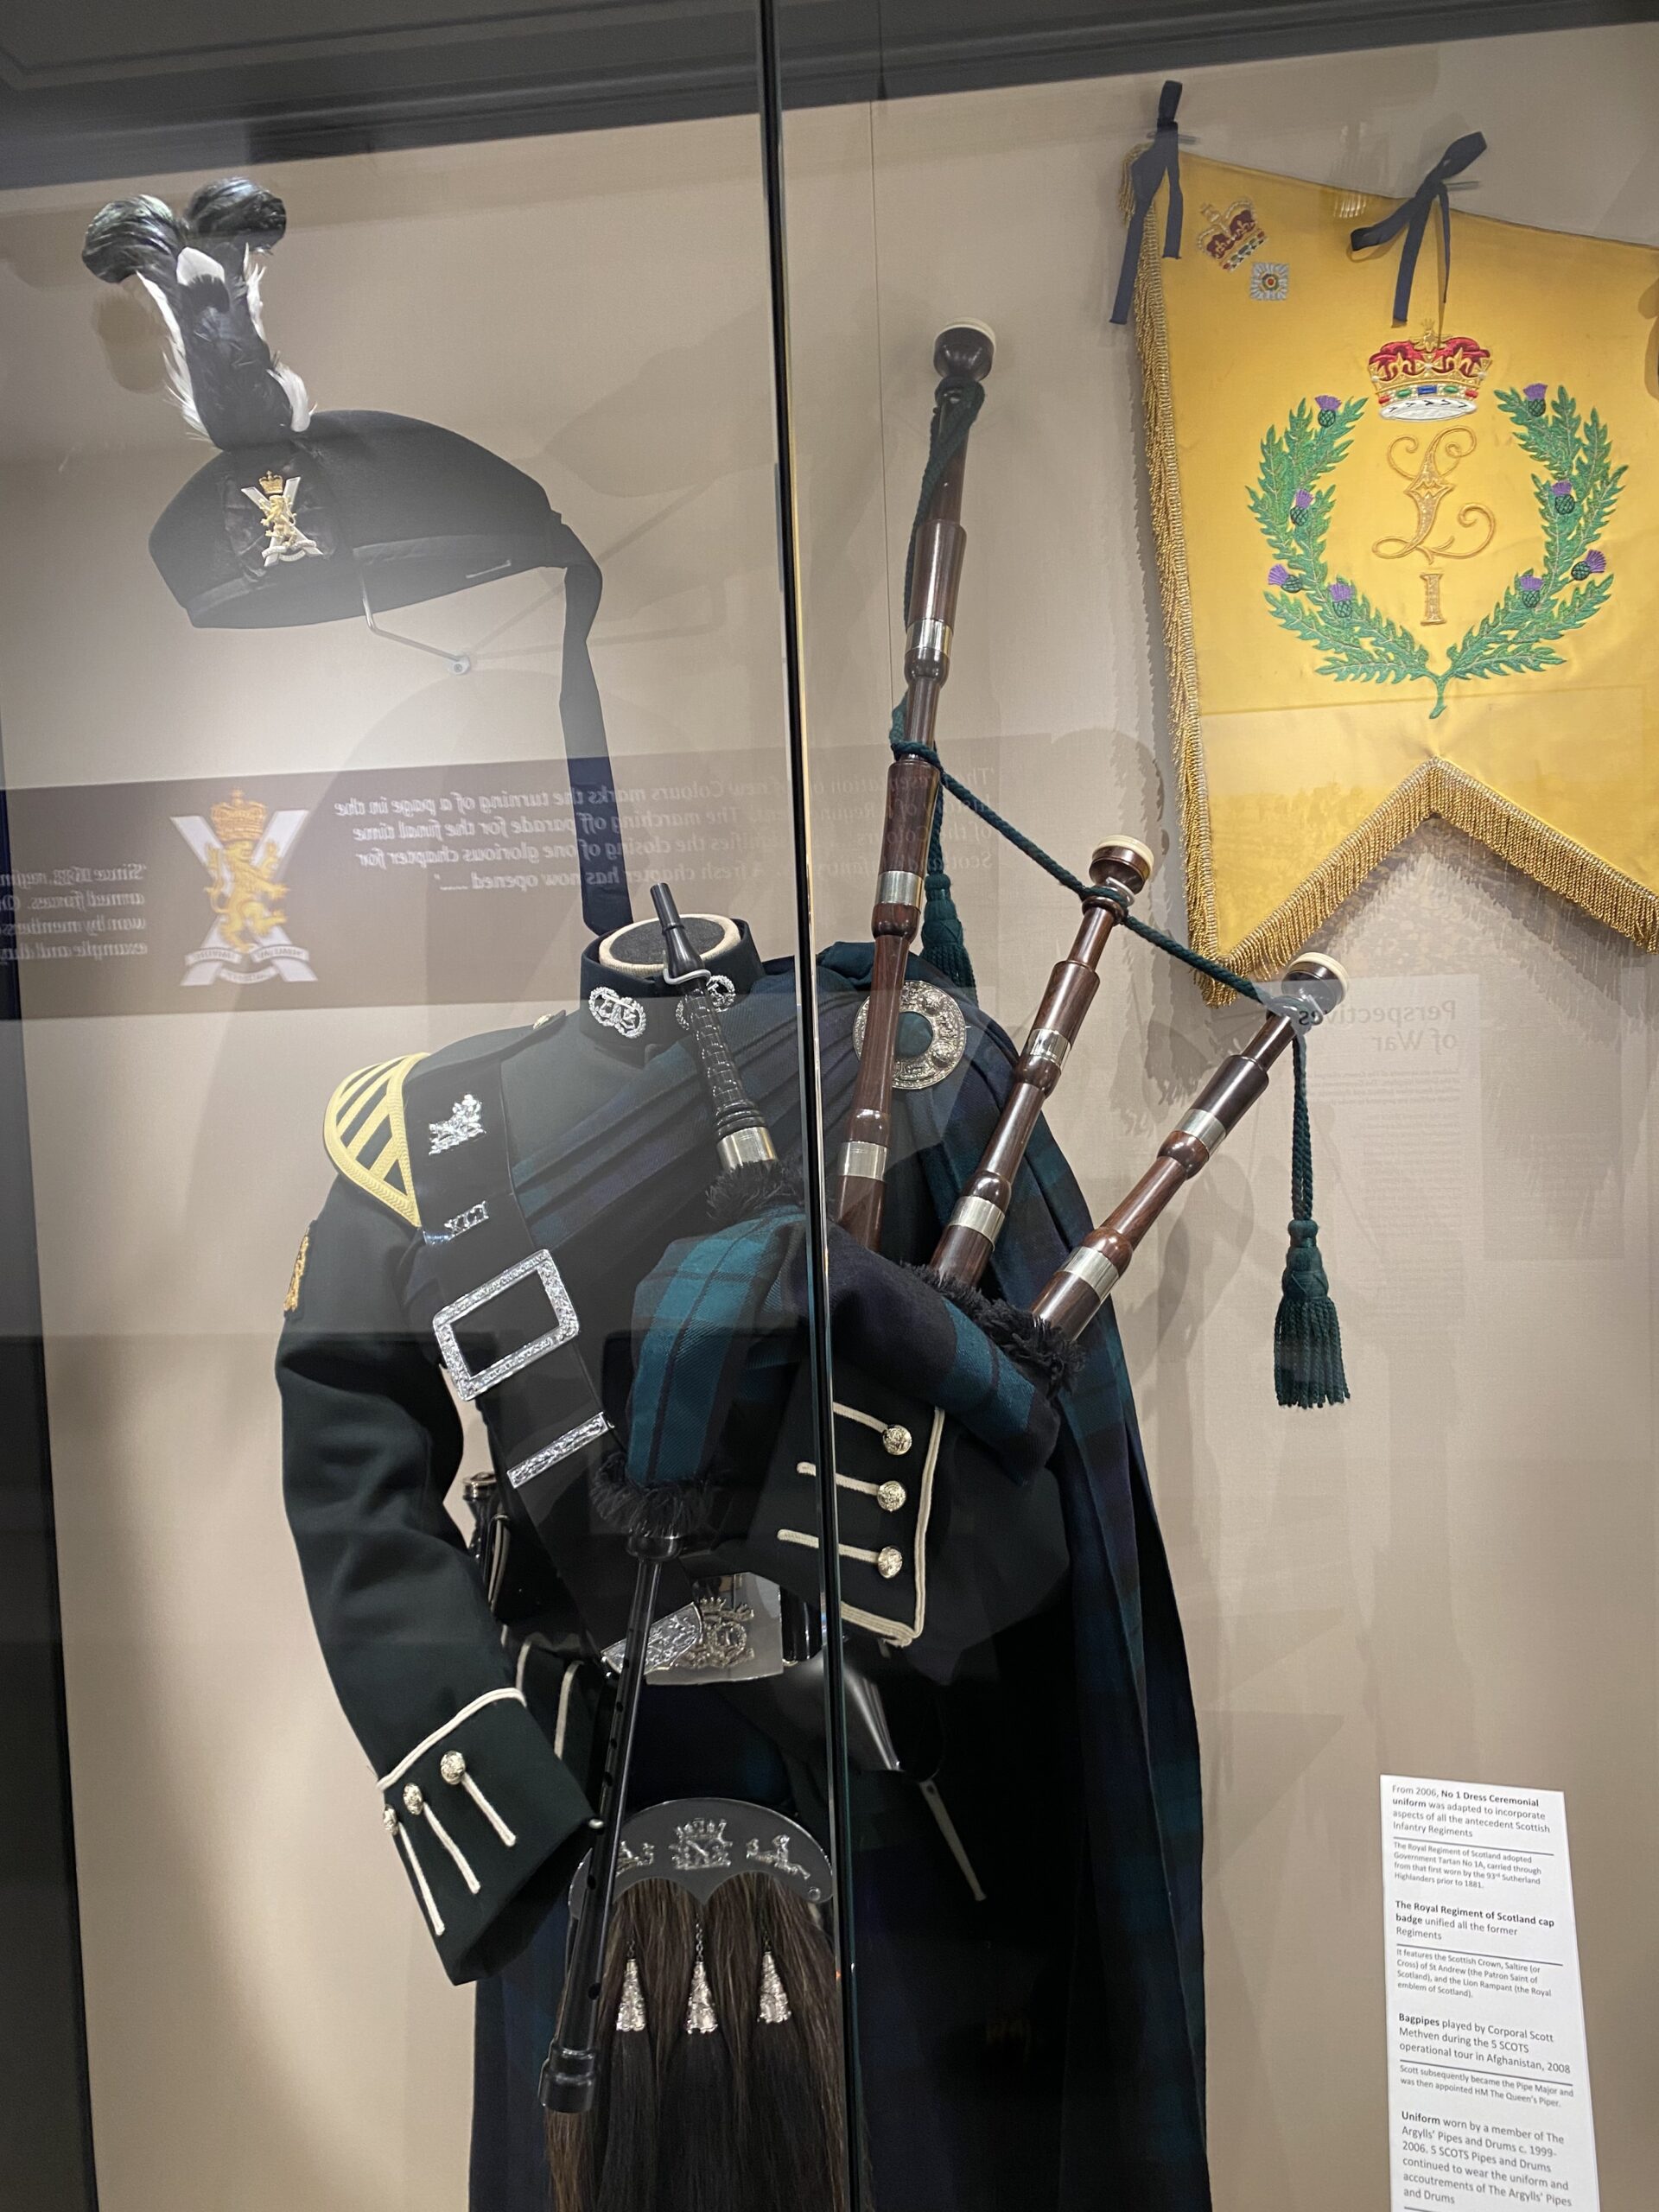 Bagpipes and outfit of an Argyll fighter